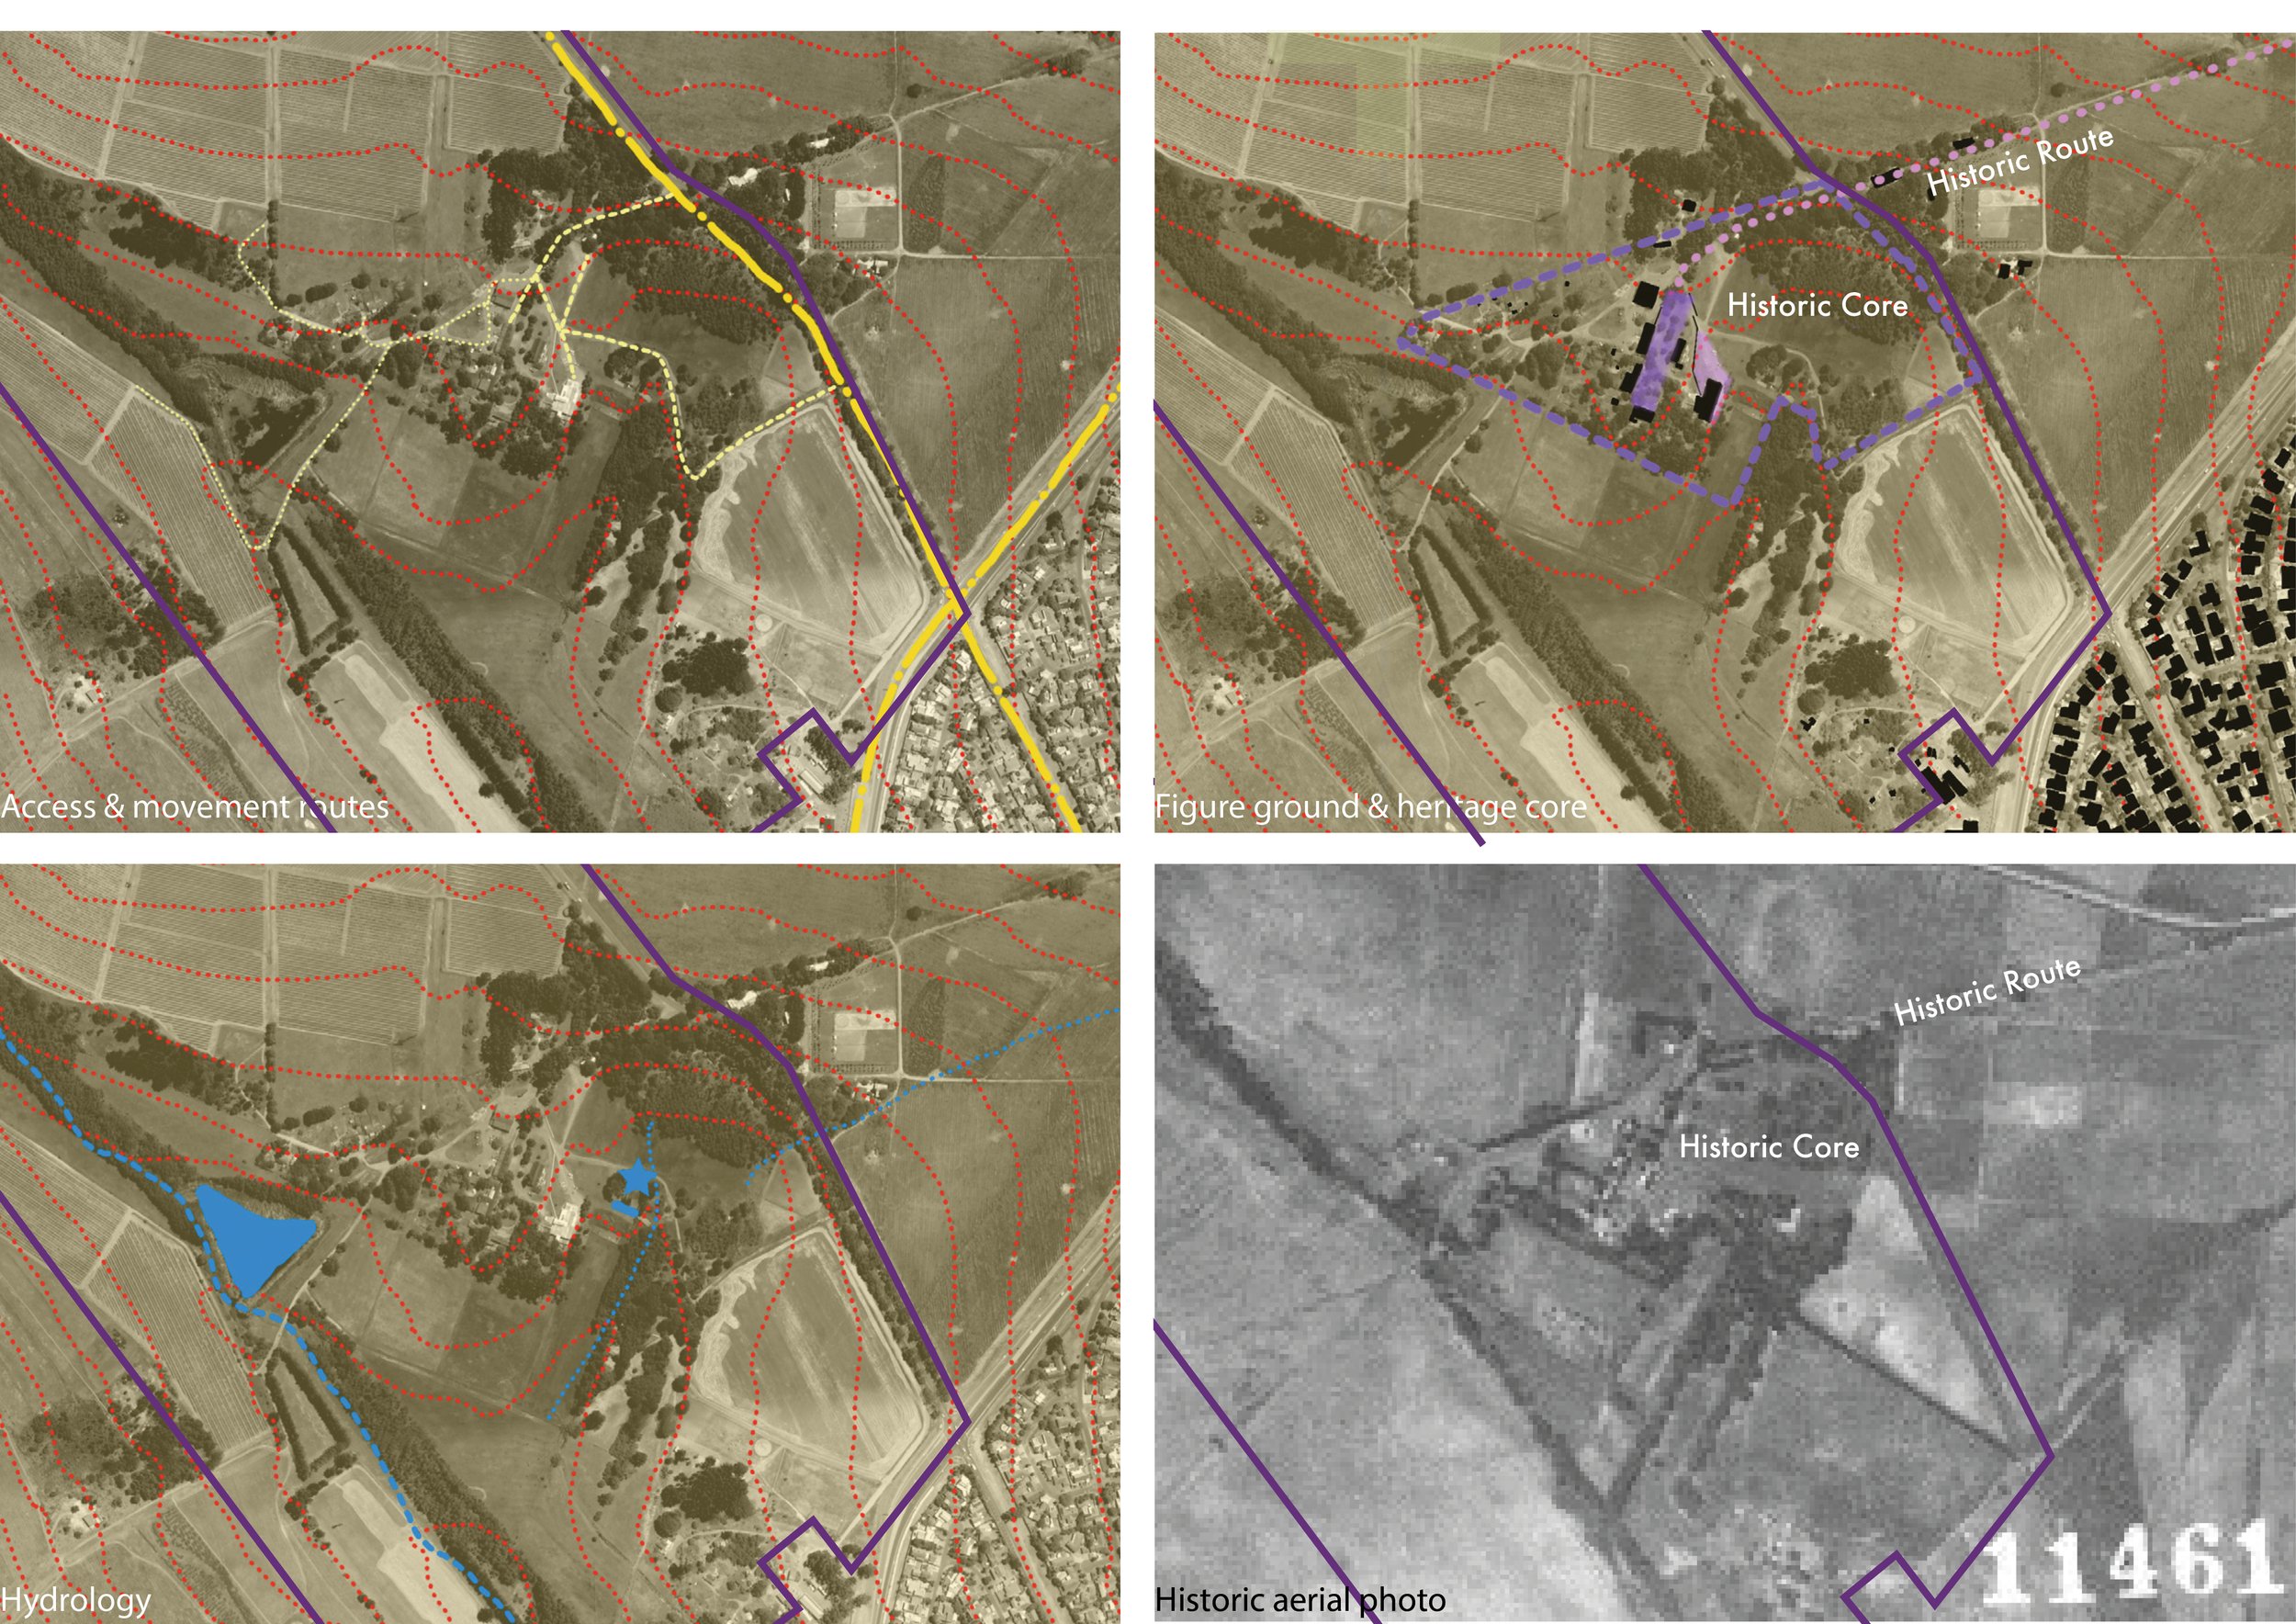  1. Landscape settlement patterns of farmstead was ‘haphazard’ and not a typical ‘werf’ layout.   2. Access to the site in unconventional  3. There are a number of drainage lines and a river integral to the site and site development  4. Historic rout